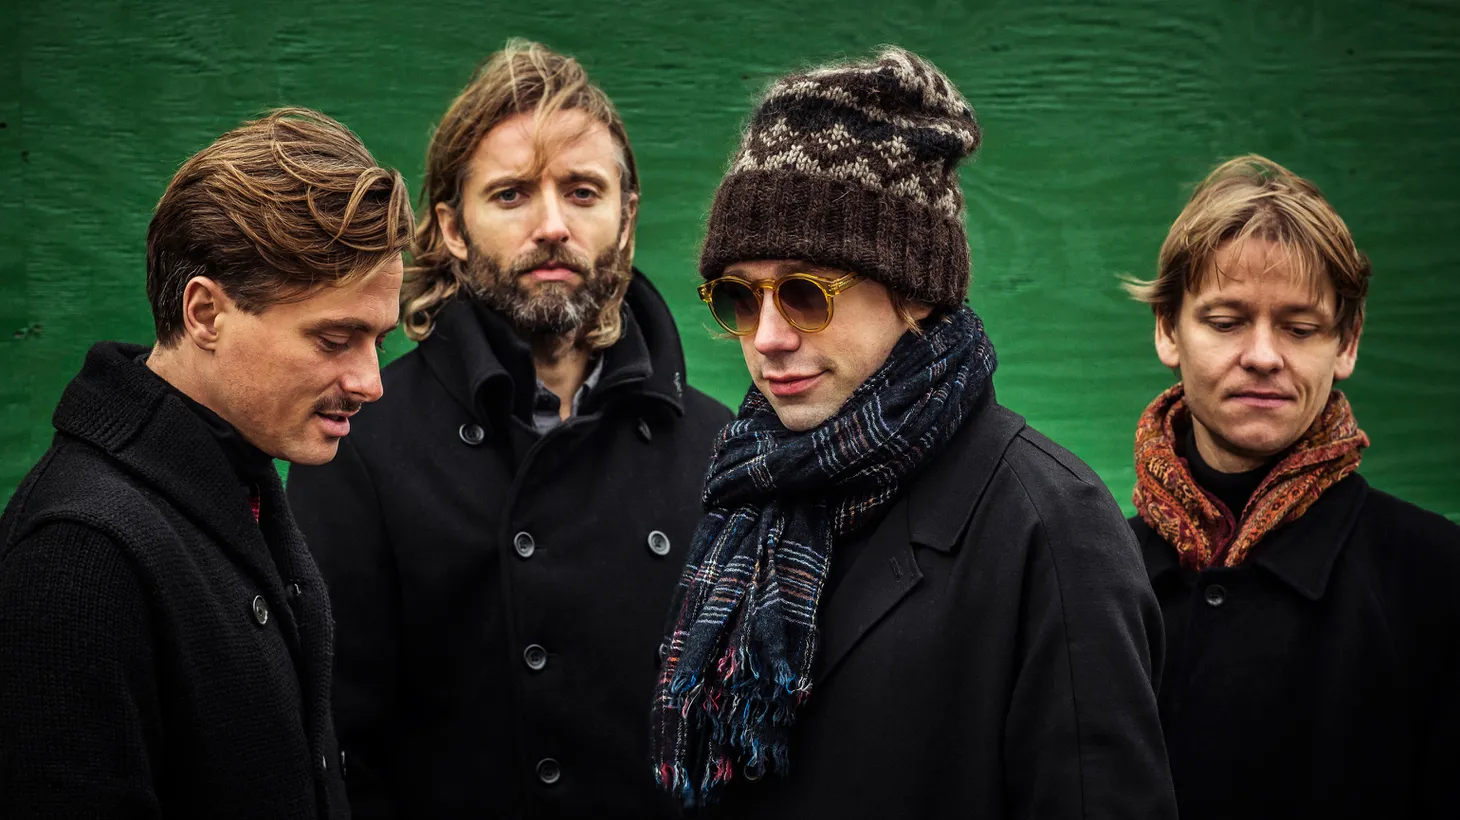 Danish art rockers Mew are back with their first album in six years!